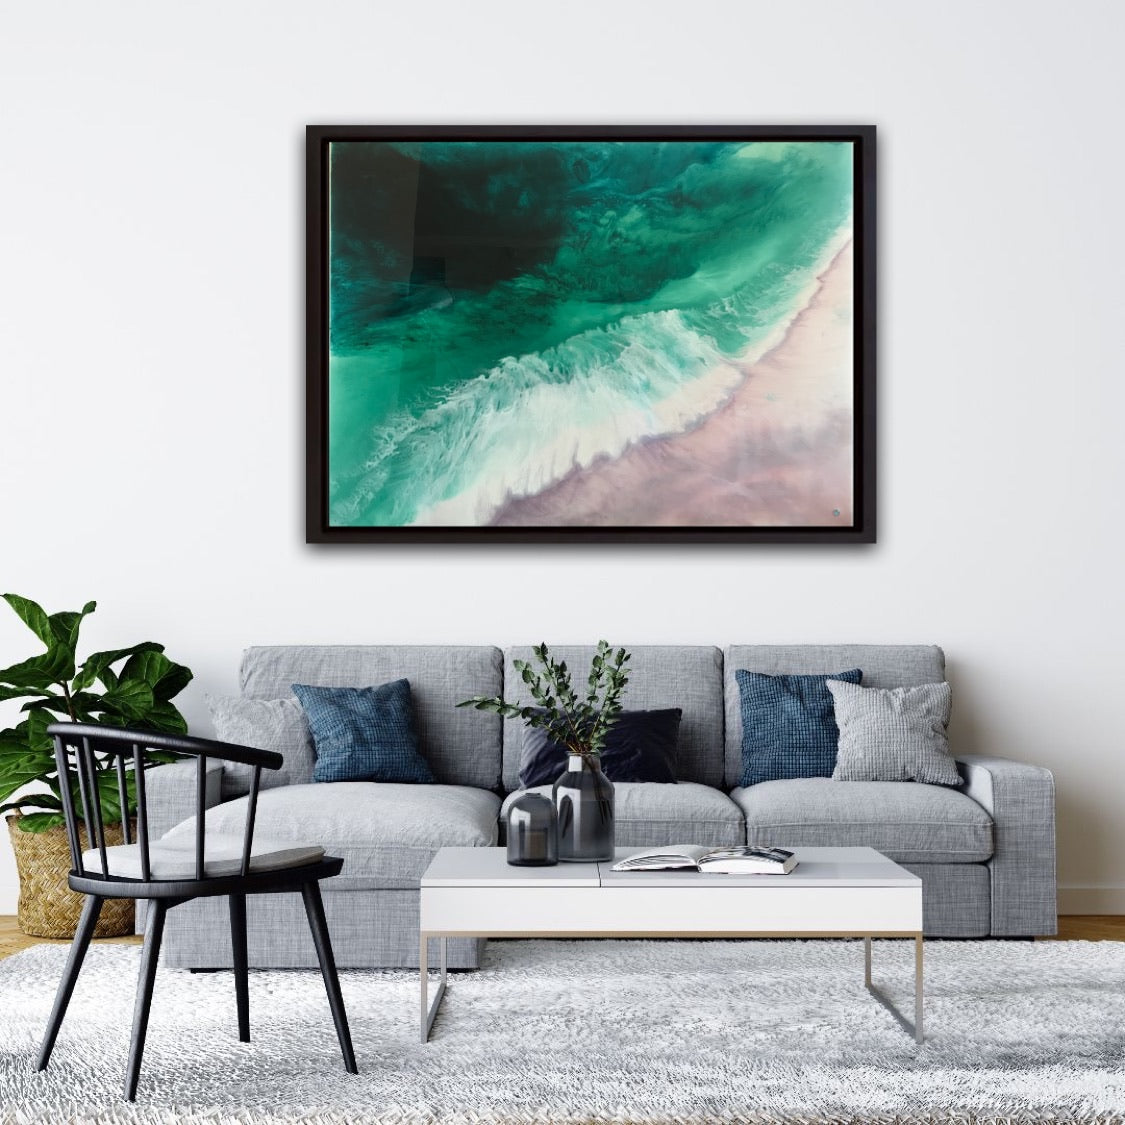 Teal Abstract Artwork. Ocean Blue. Bronte Undercurrent. Antuanelle 6 Undercurrent. Green and Pink Abstract. Original 90x120 cm